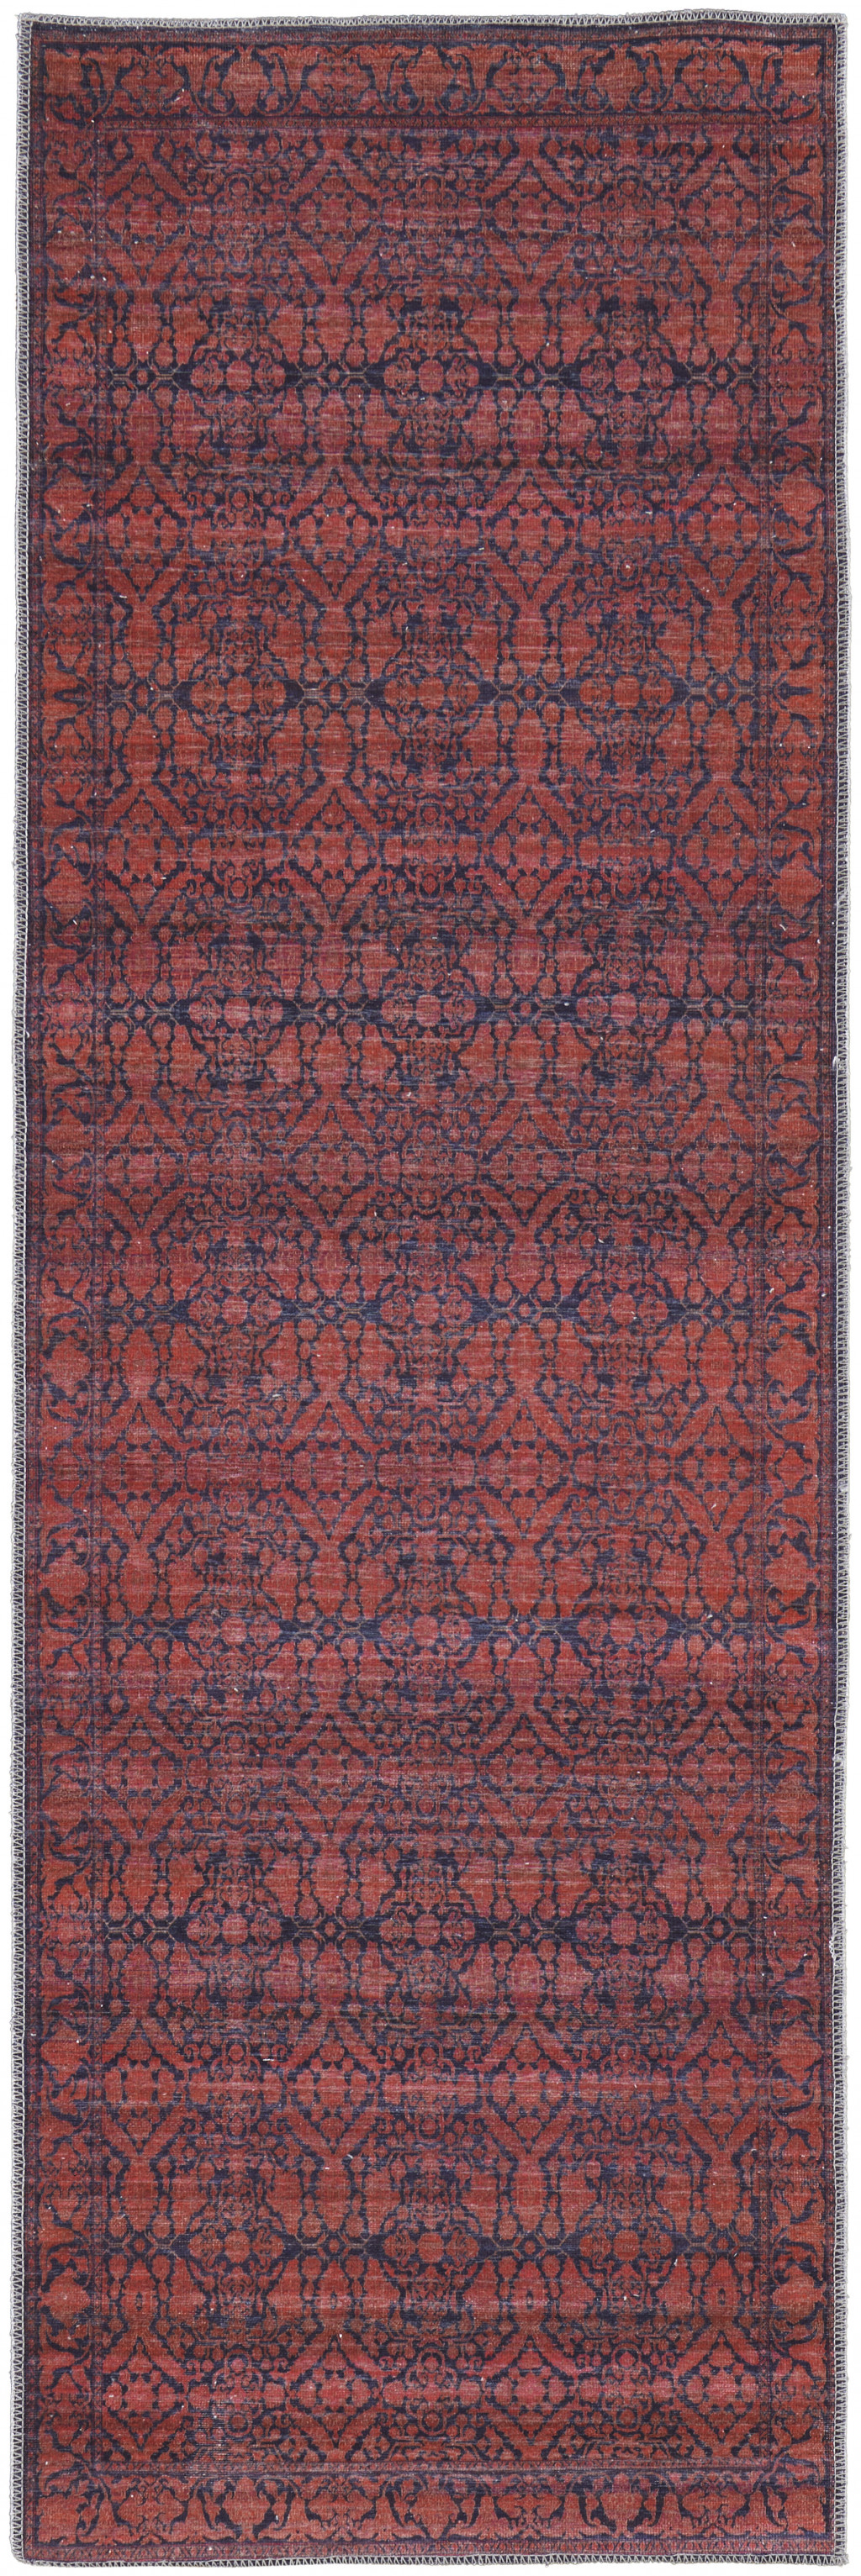 8' Red And Black Floral Power Loom Runner Rug-515201-1